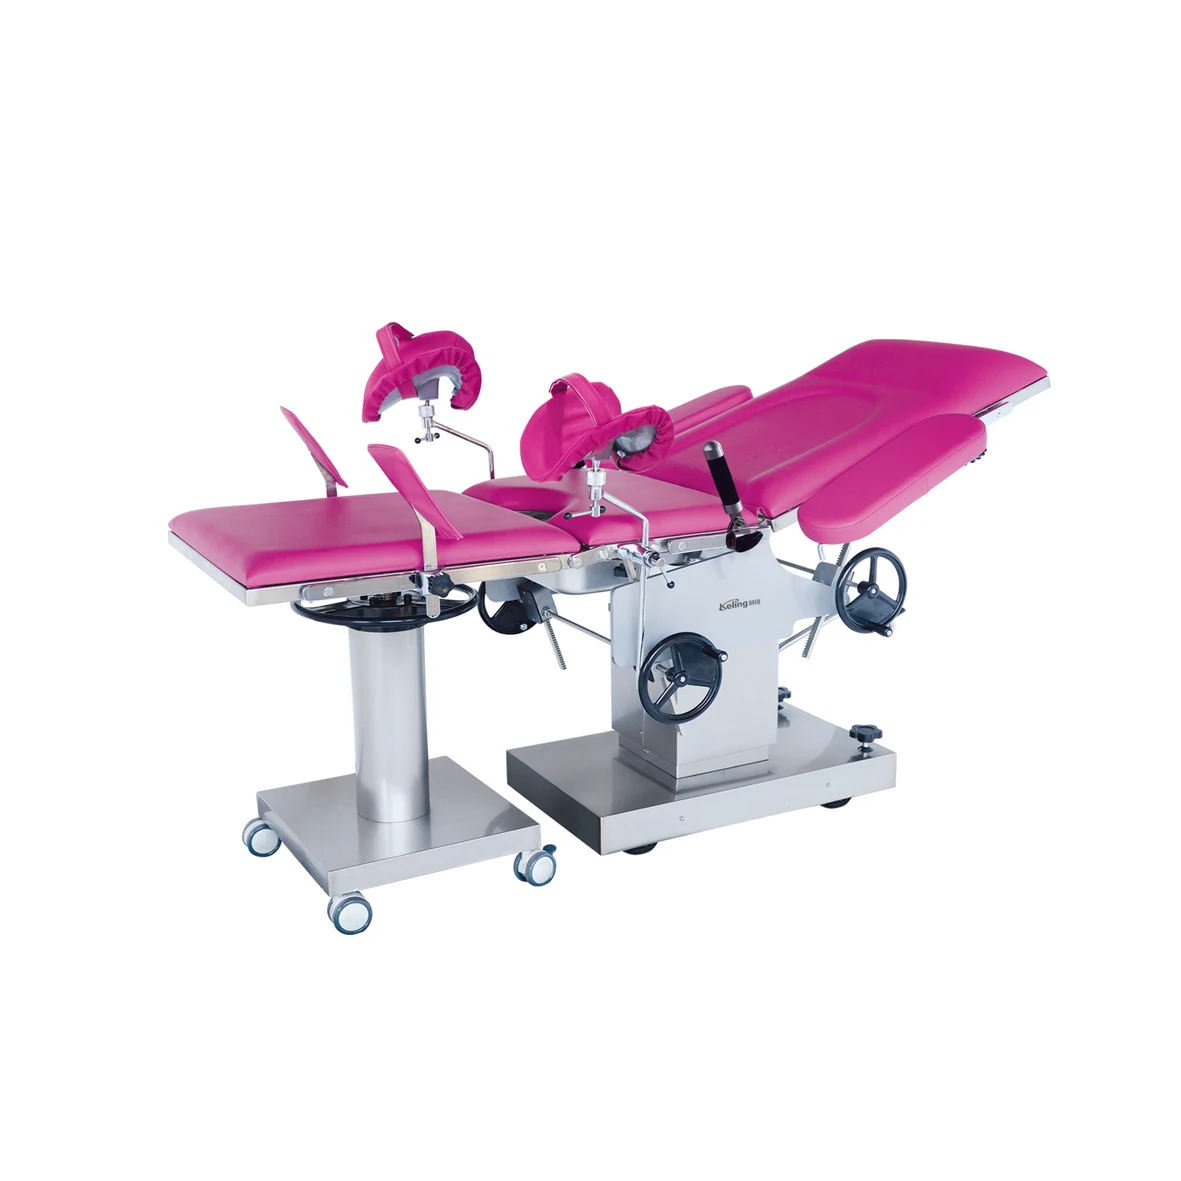 integrated obstetric bed is suitable for conducting parturient delivery, gynecological surgery, operative abortion, diagnosis a